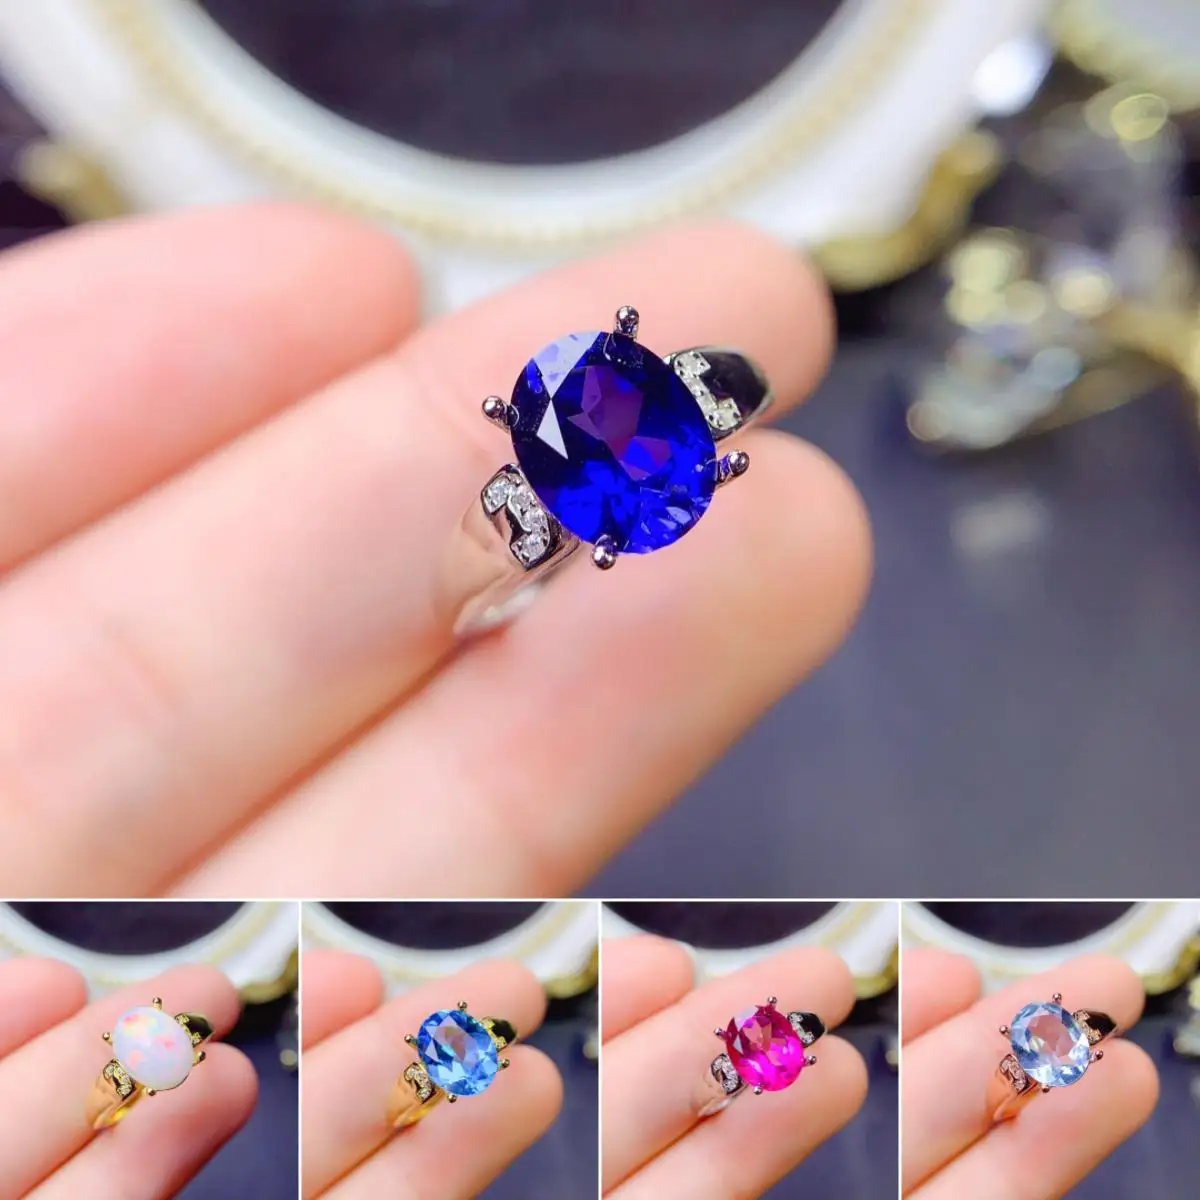 

FS Inlay 8*10 Natural Sapphire/Opal/Topaz Ring S925 Sterling Silver Fine Charm Weddings Jewelry for Women MeiBaPJ